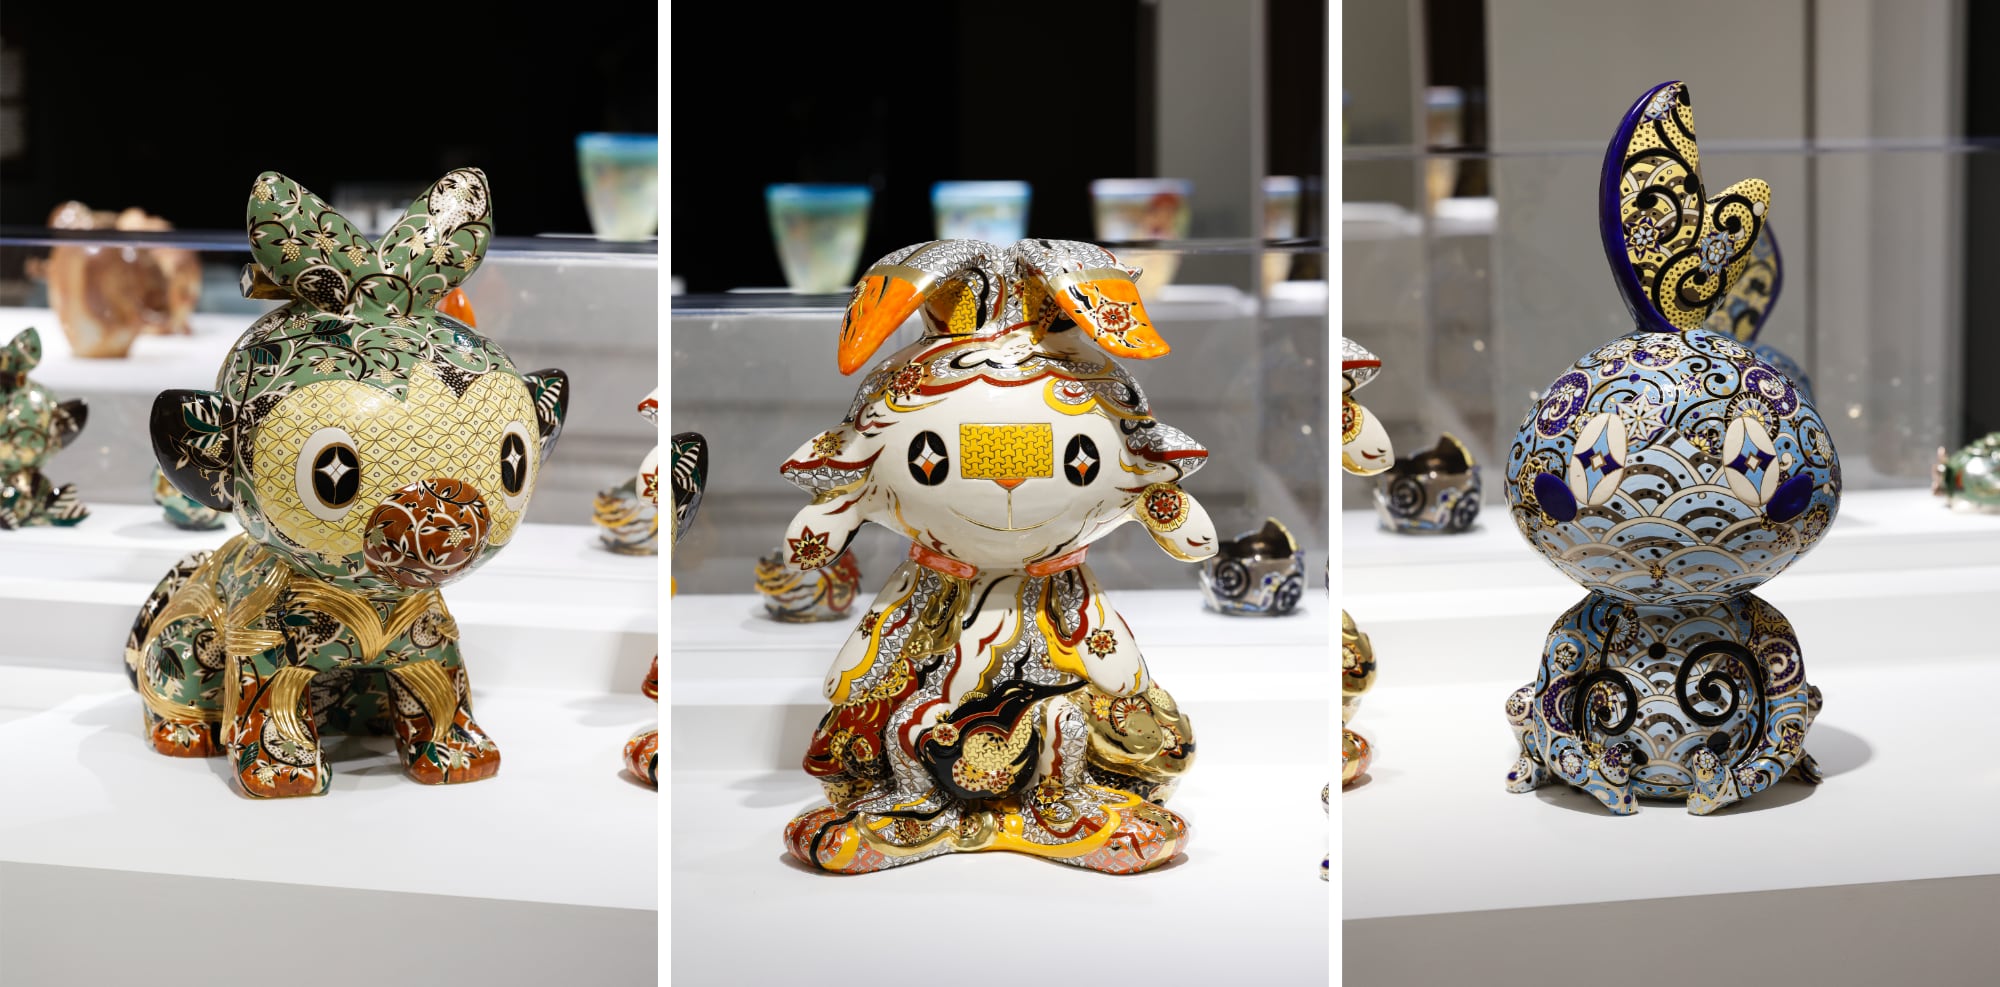 three images of small ceramic creatures covered in ornate patterns